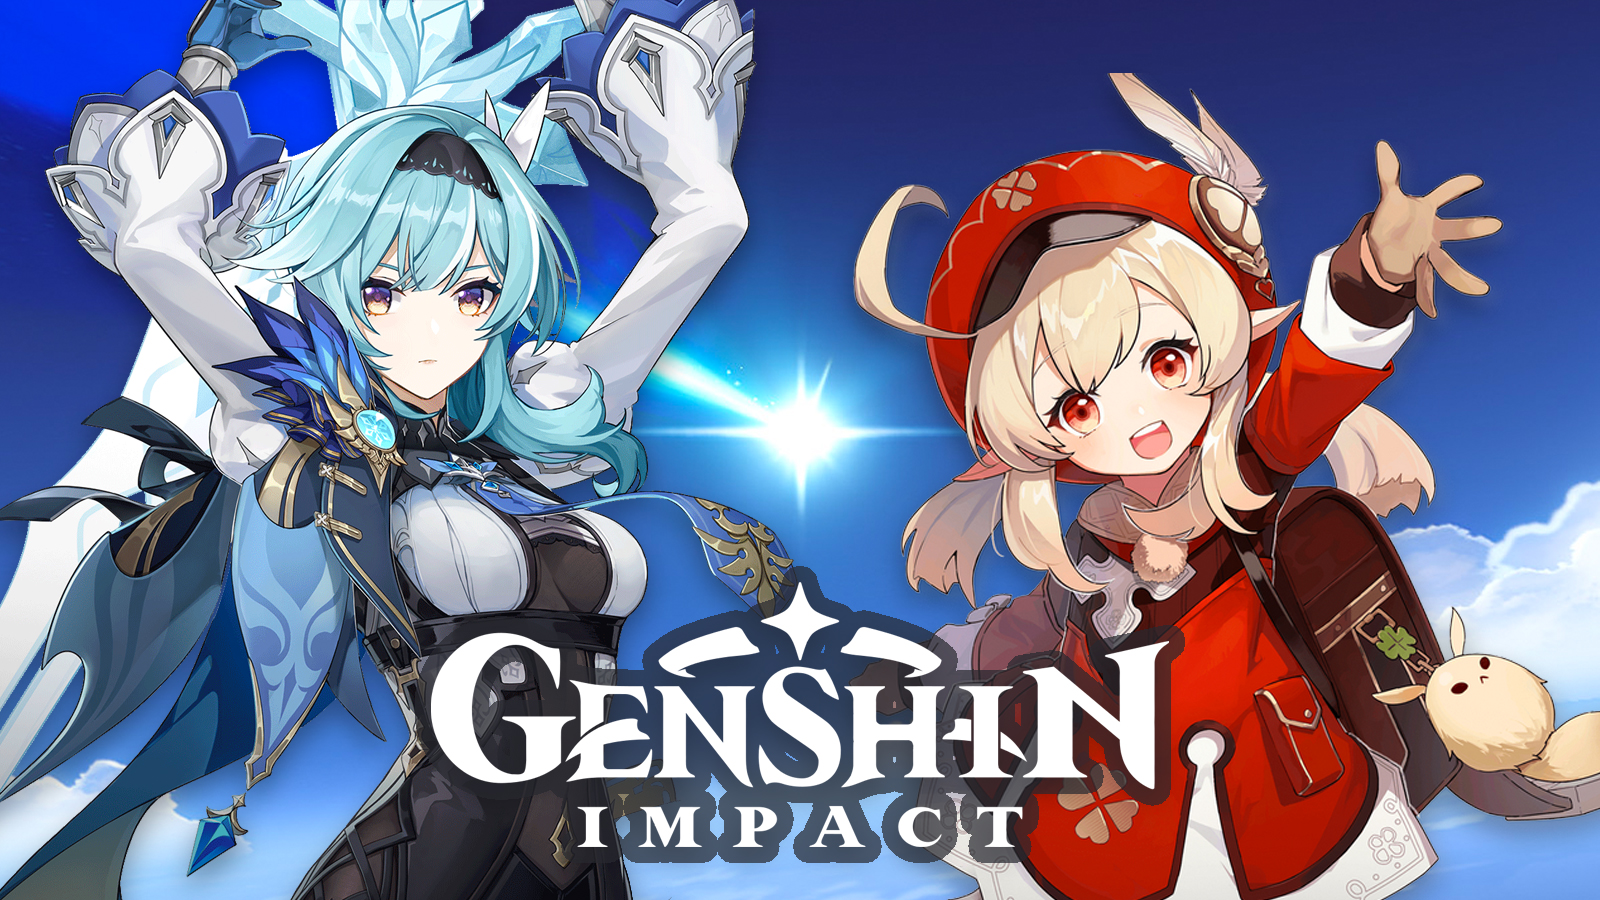 5 anime characters we want to see in Genshin Impact